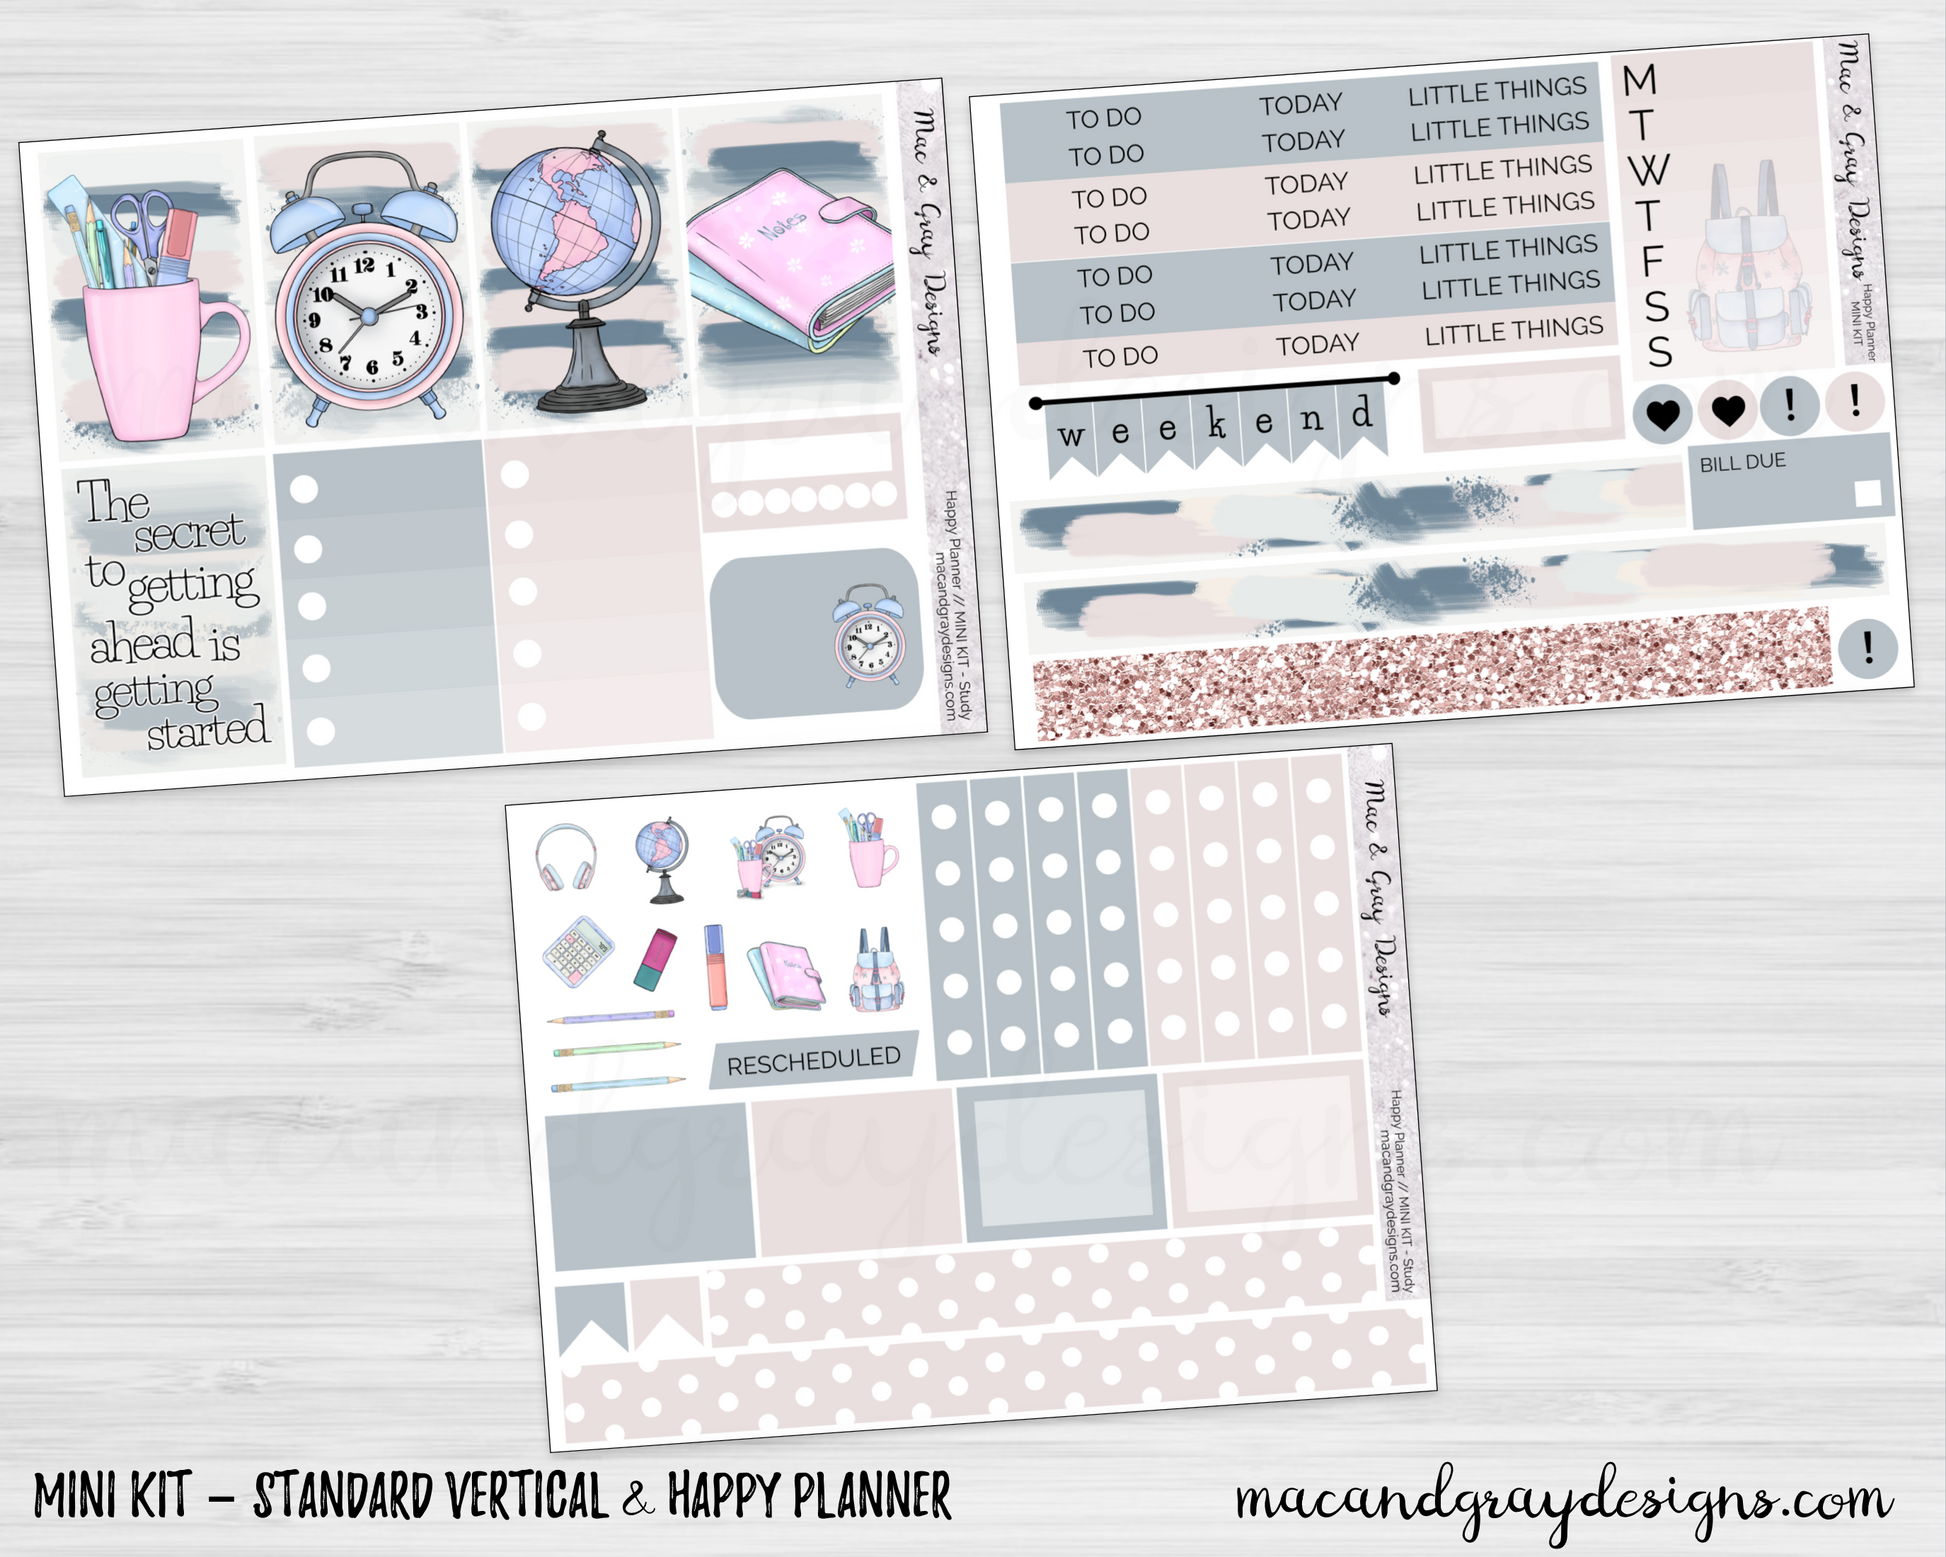 The Complete Planner Sticker Kit